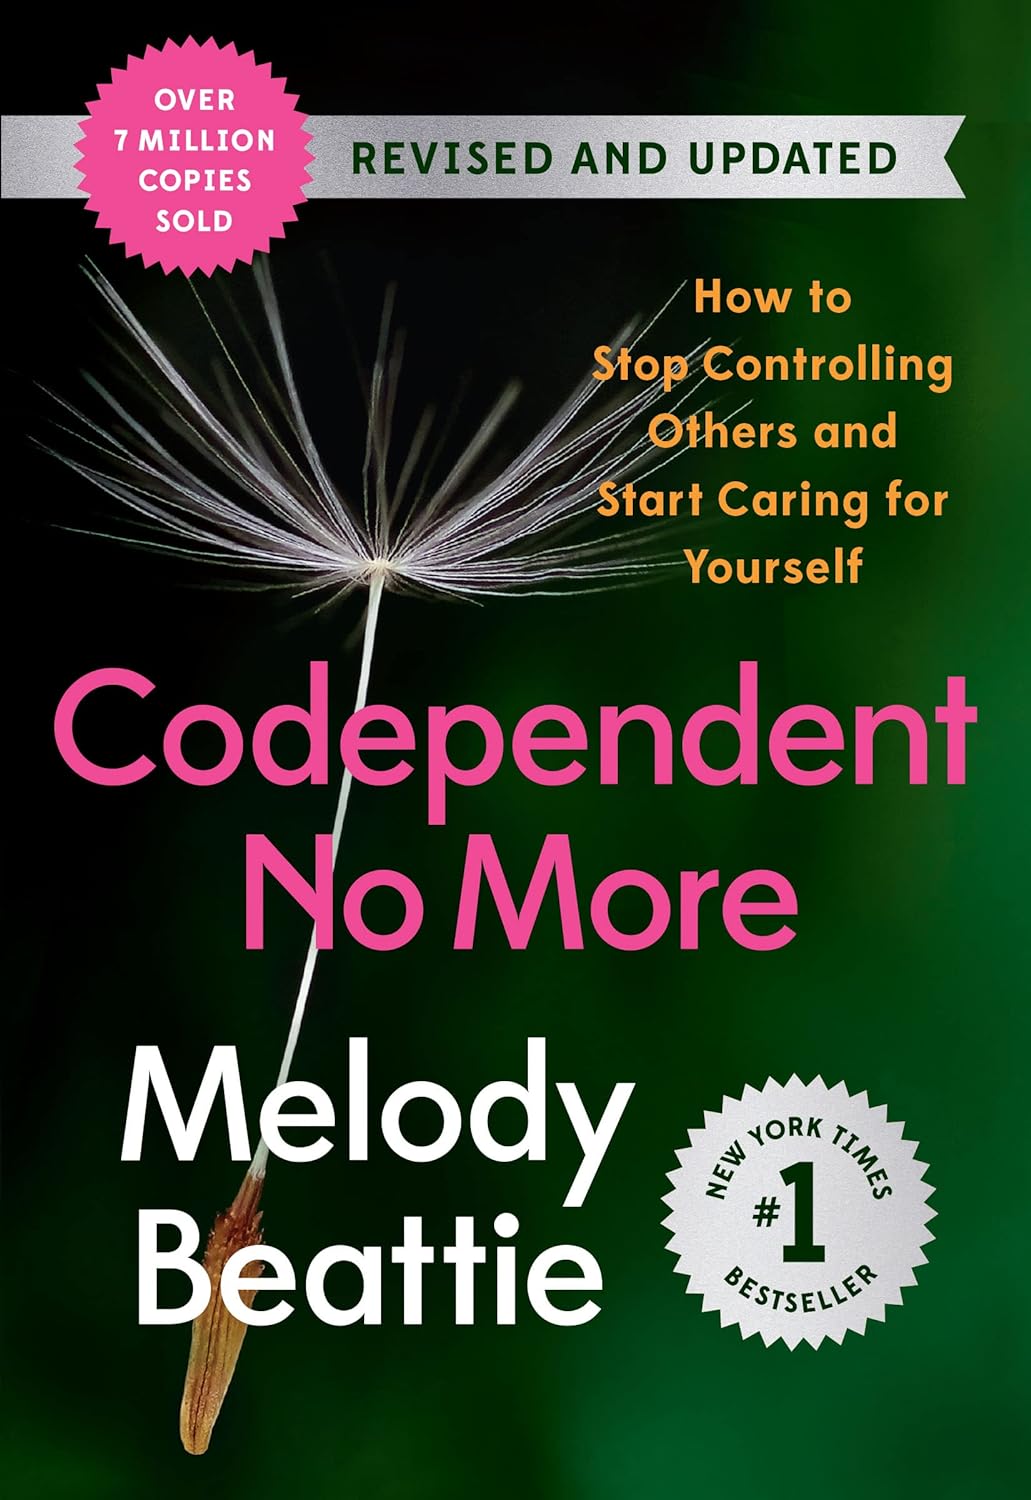 Codependent No More Book Recommended By Briana Lefman at Hamsa Healing Space - Book